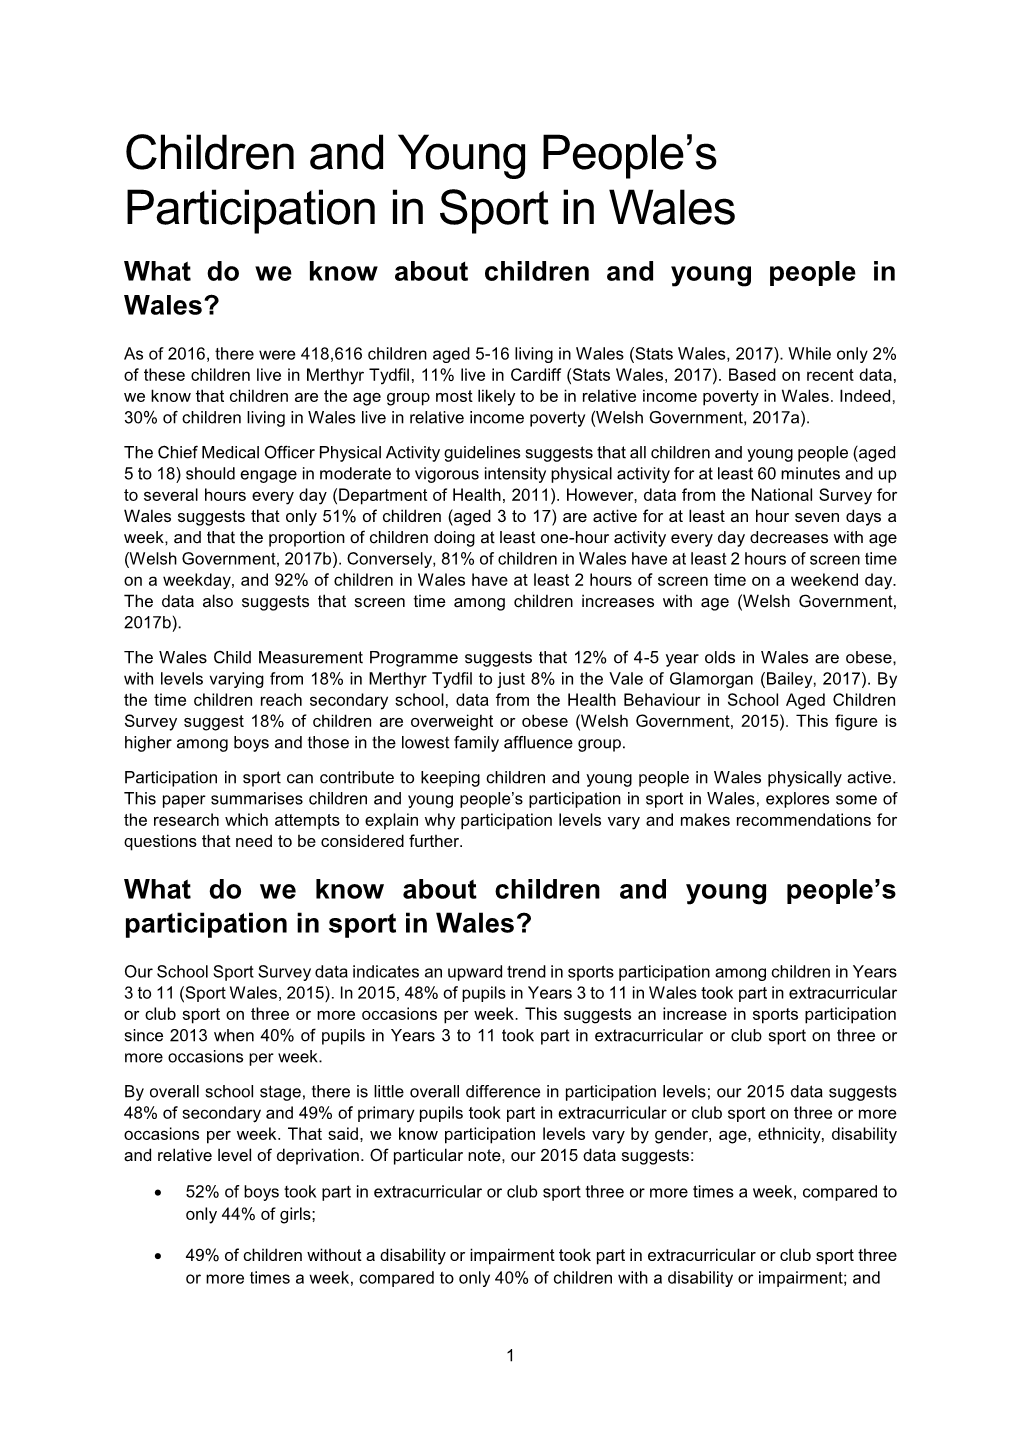 Children and Young People's Participation in Sport in Wales